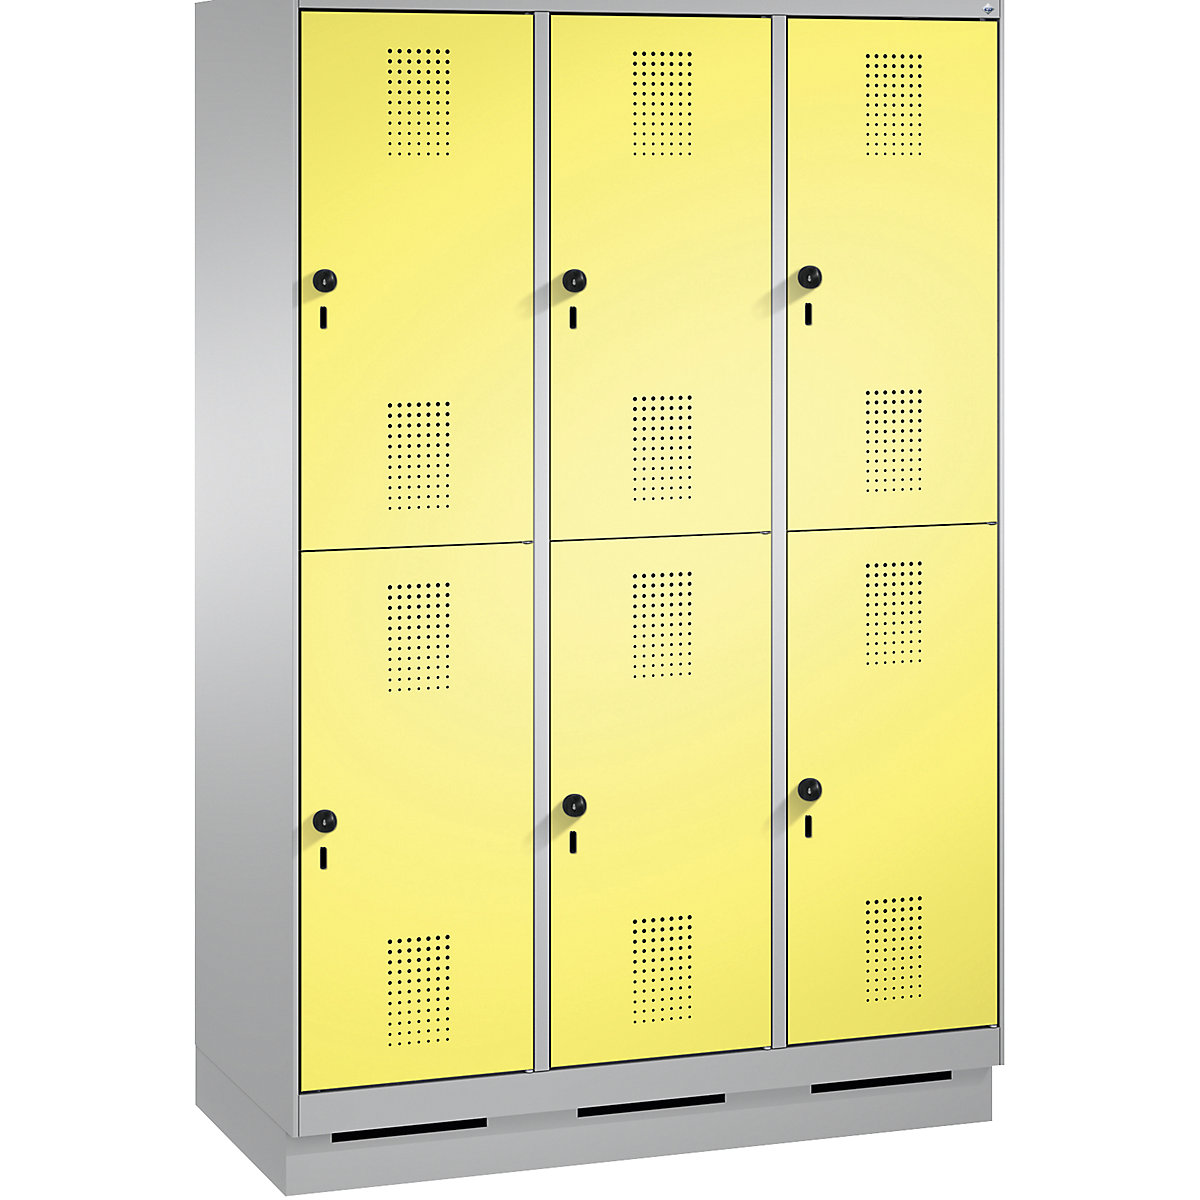 EVOLO cloakroom locker, double tier, with plinth – C+P, 3 compartments, 2 shelf compartments each, compartment width 400 mm, white aluminium / sulphur yellow-16